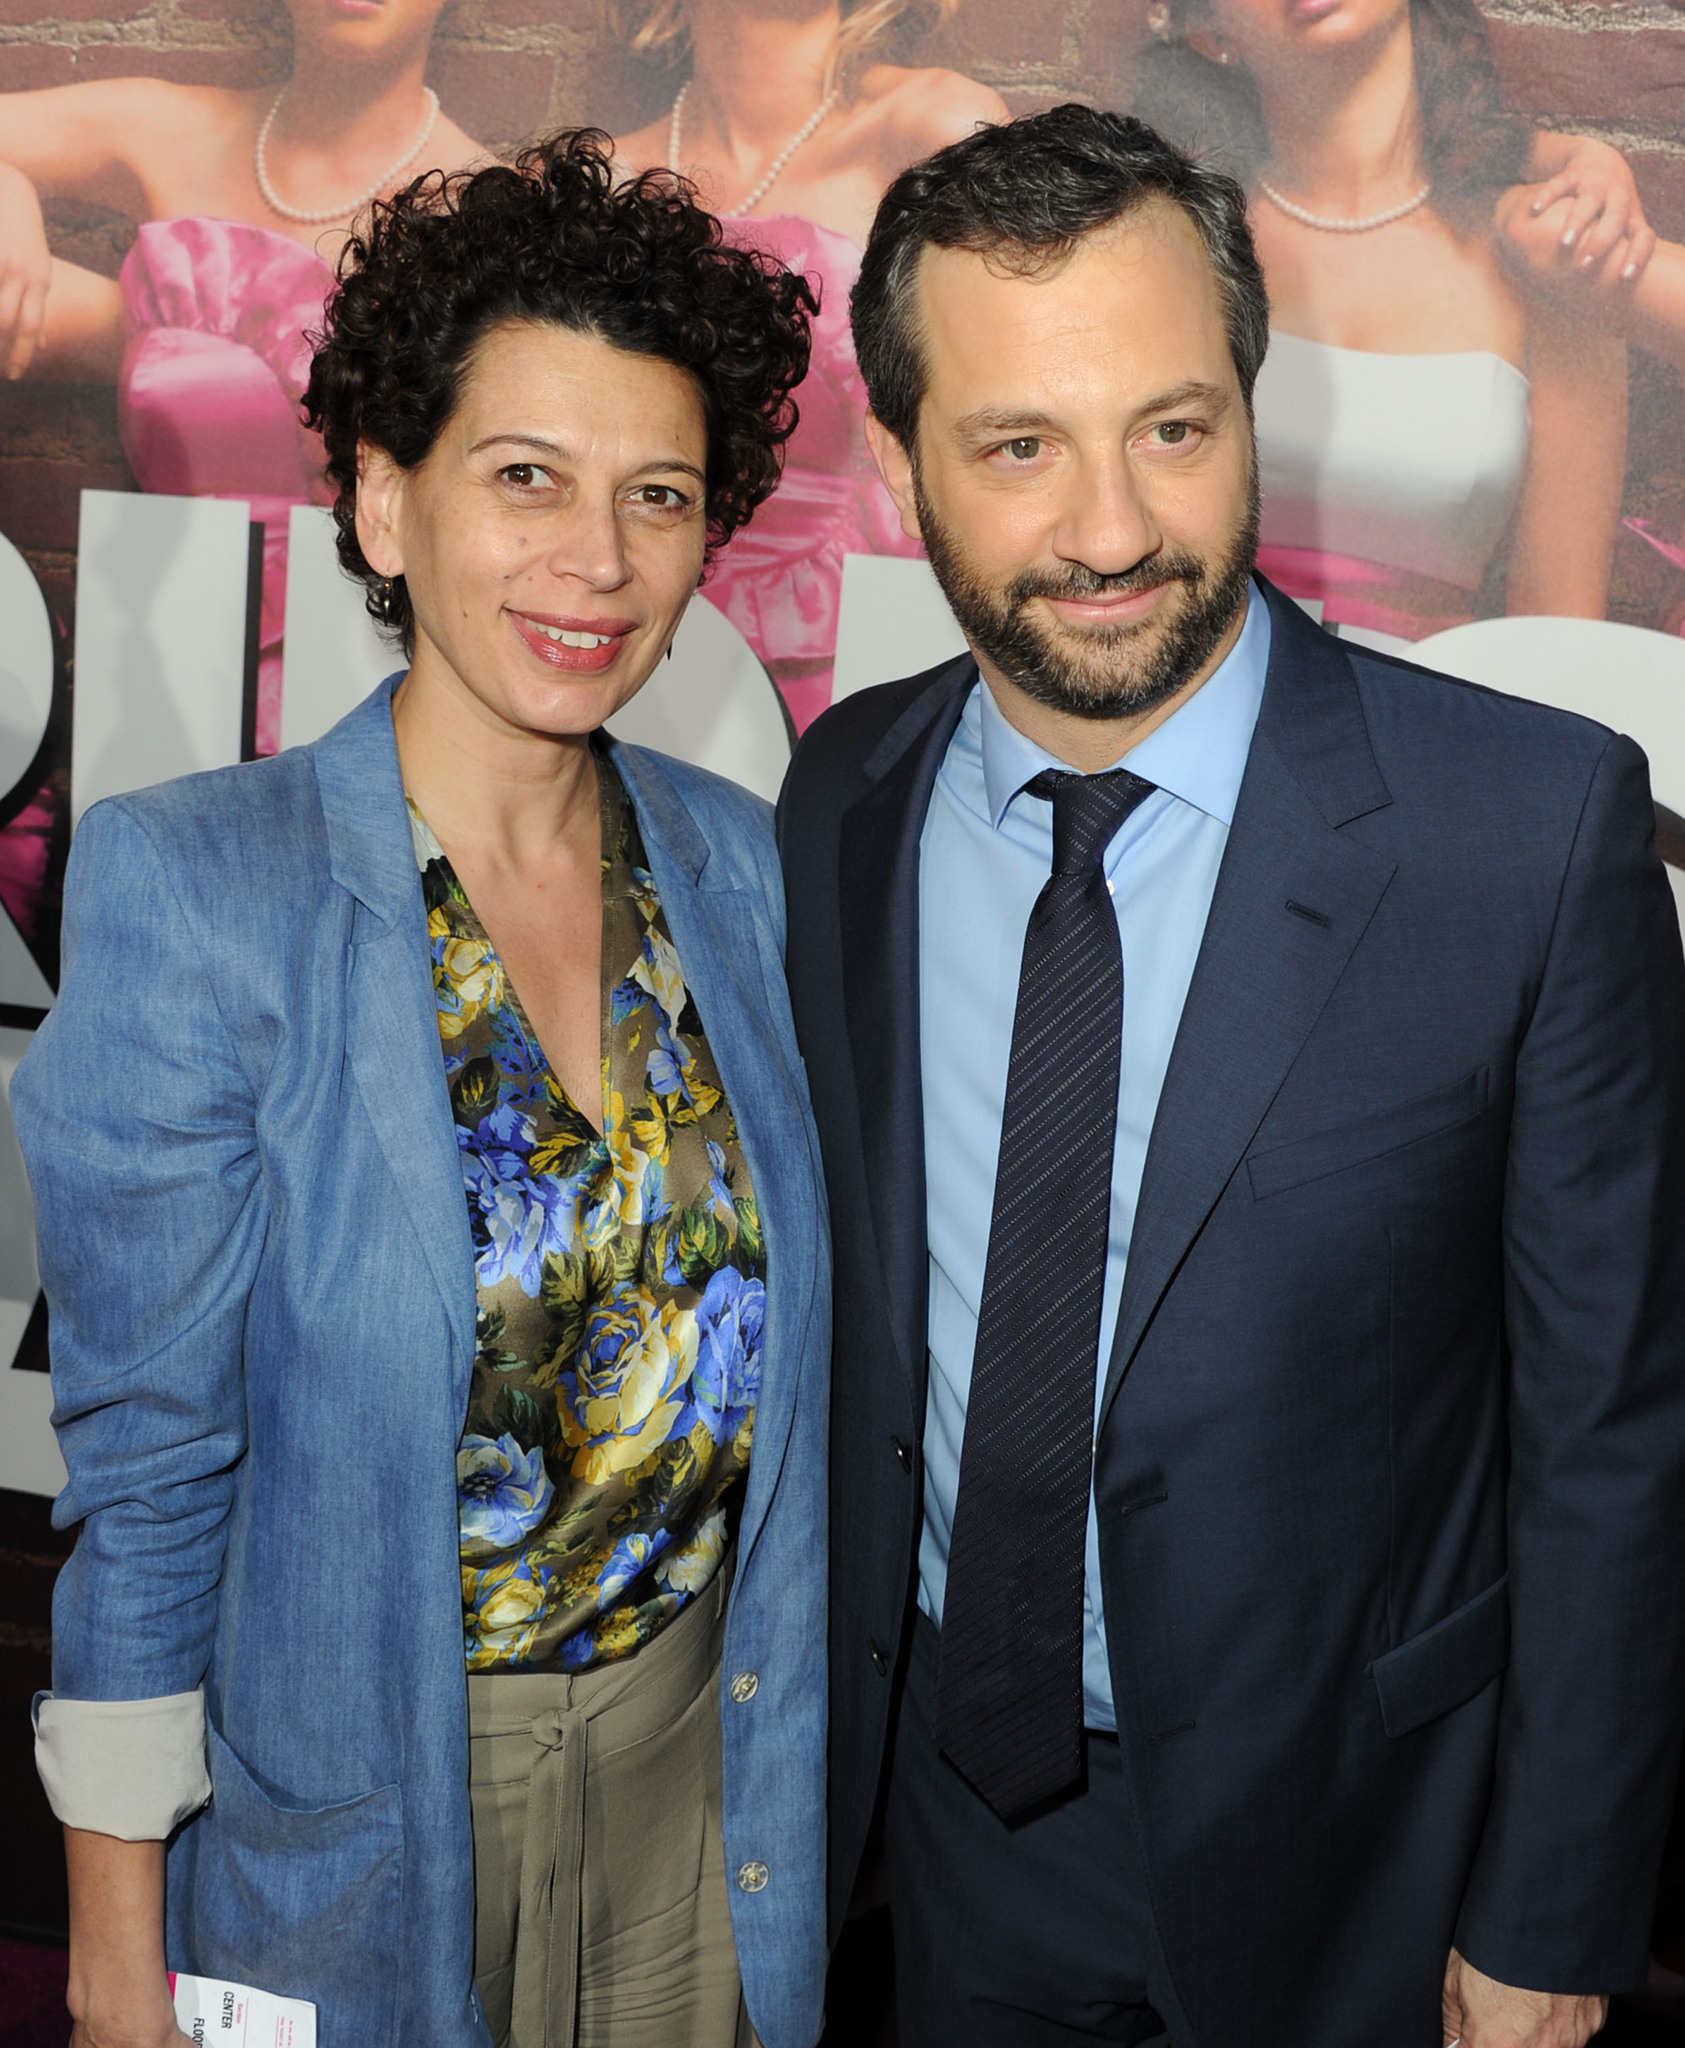 Judd Apatow and Donna Langley at event of Sunokusios pamerges (2011)